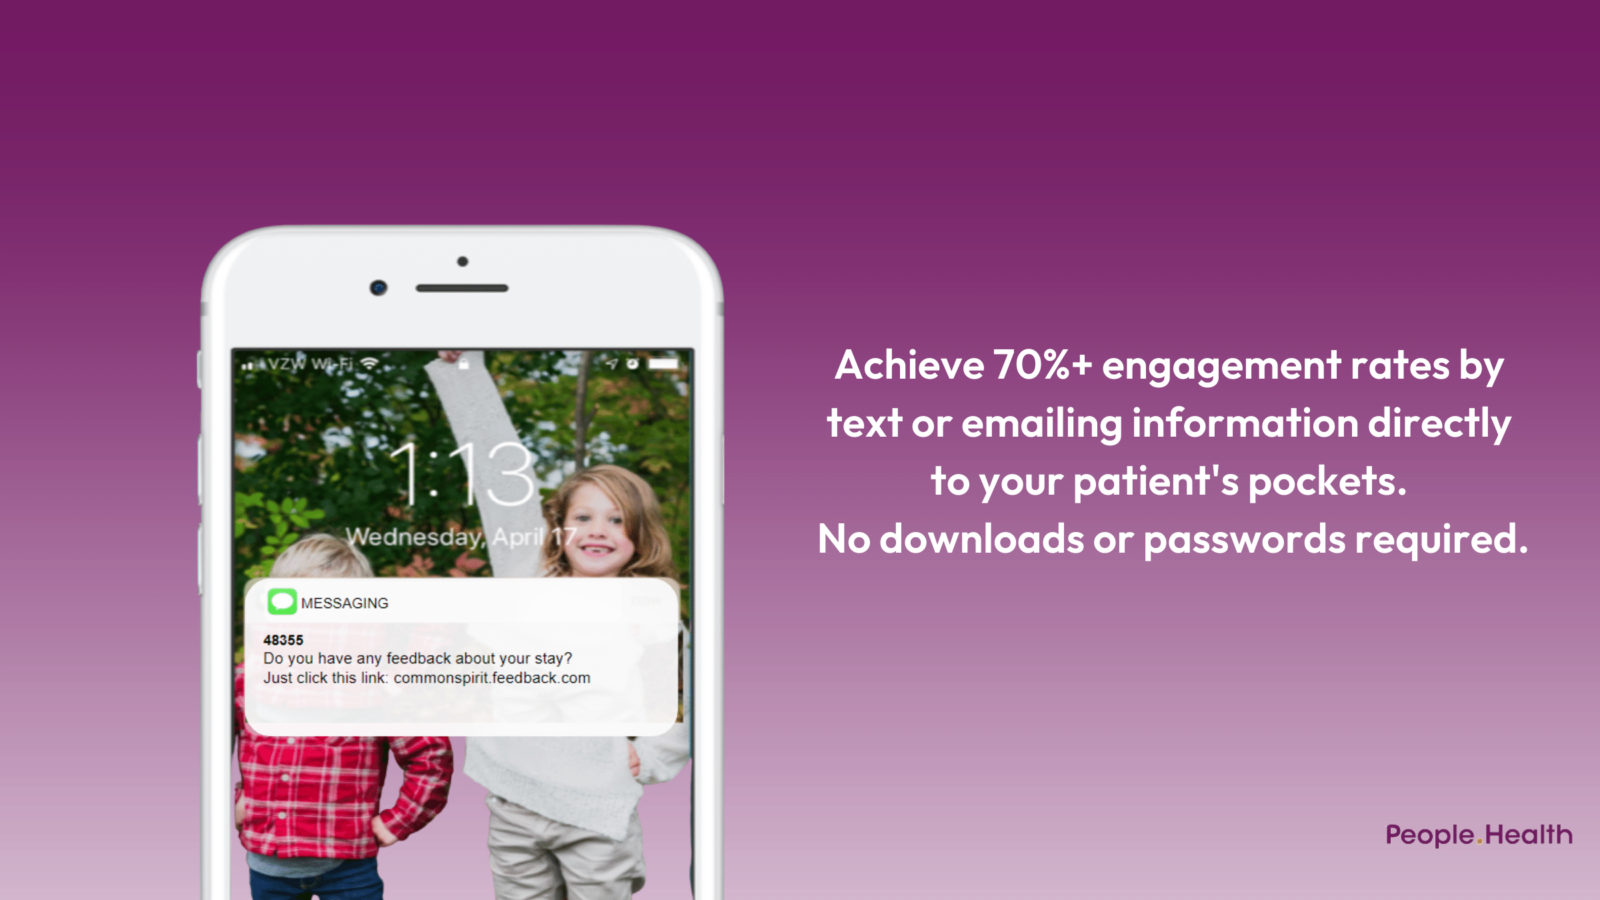 Achieve 70%+ engagement rates by text or emailing information directly to your patient's pockets. No downloads or passwords required.